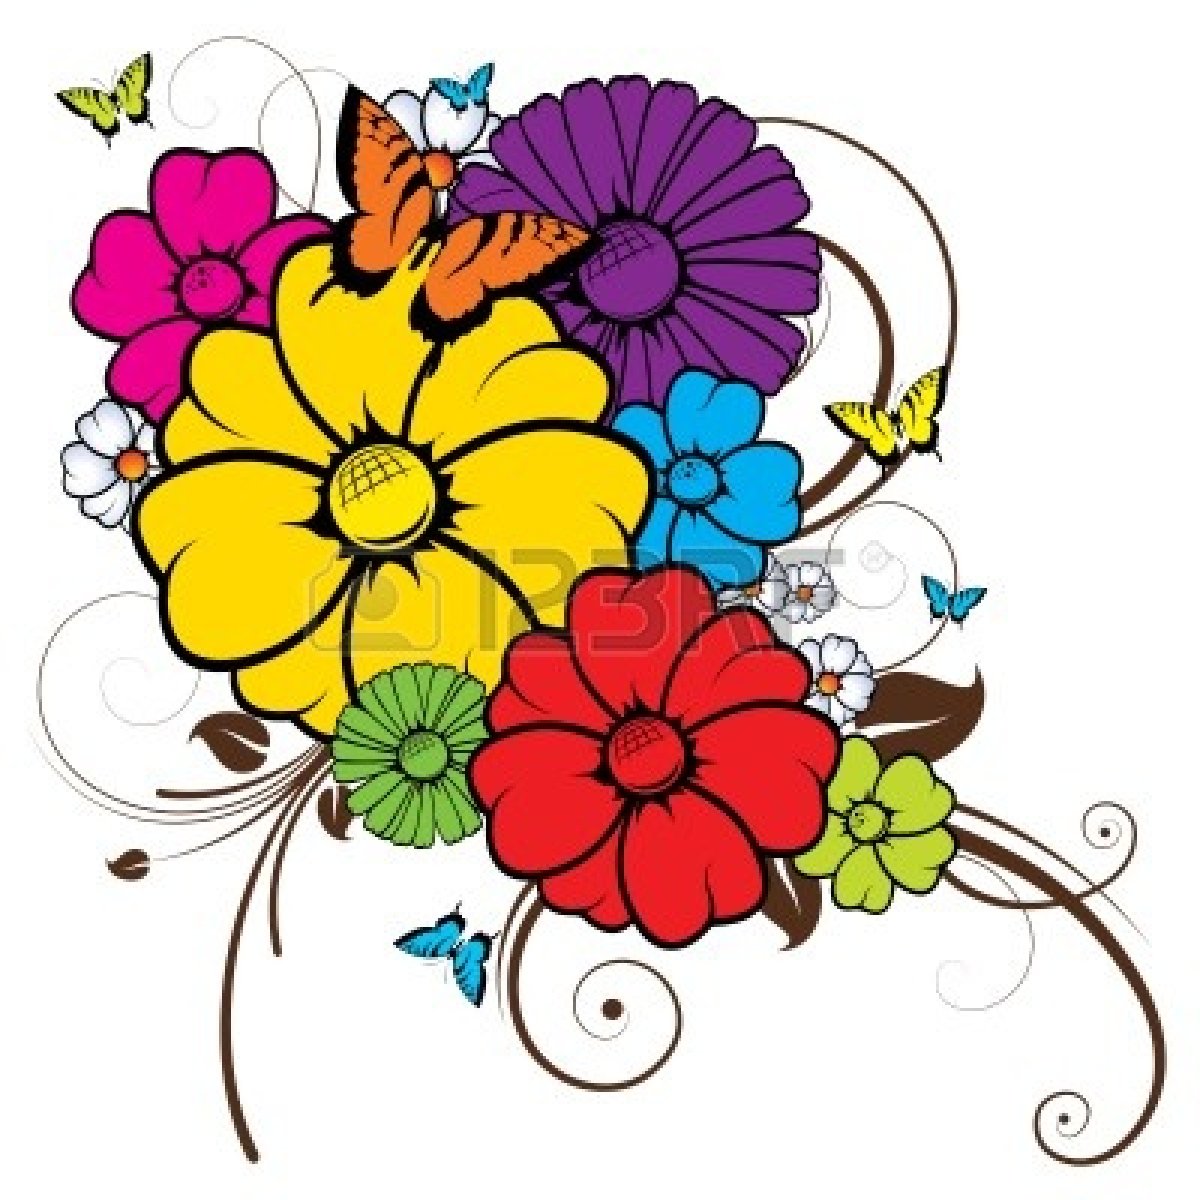 Abstract Flower Clip Art | Clipart library - Free Clipart Images